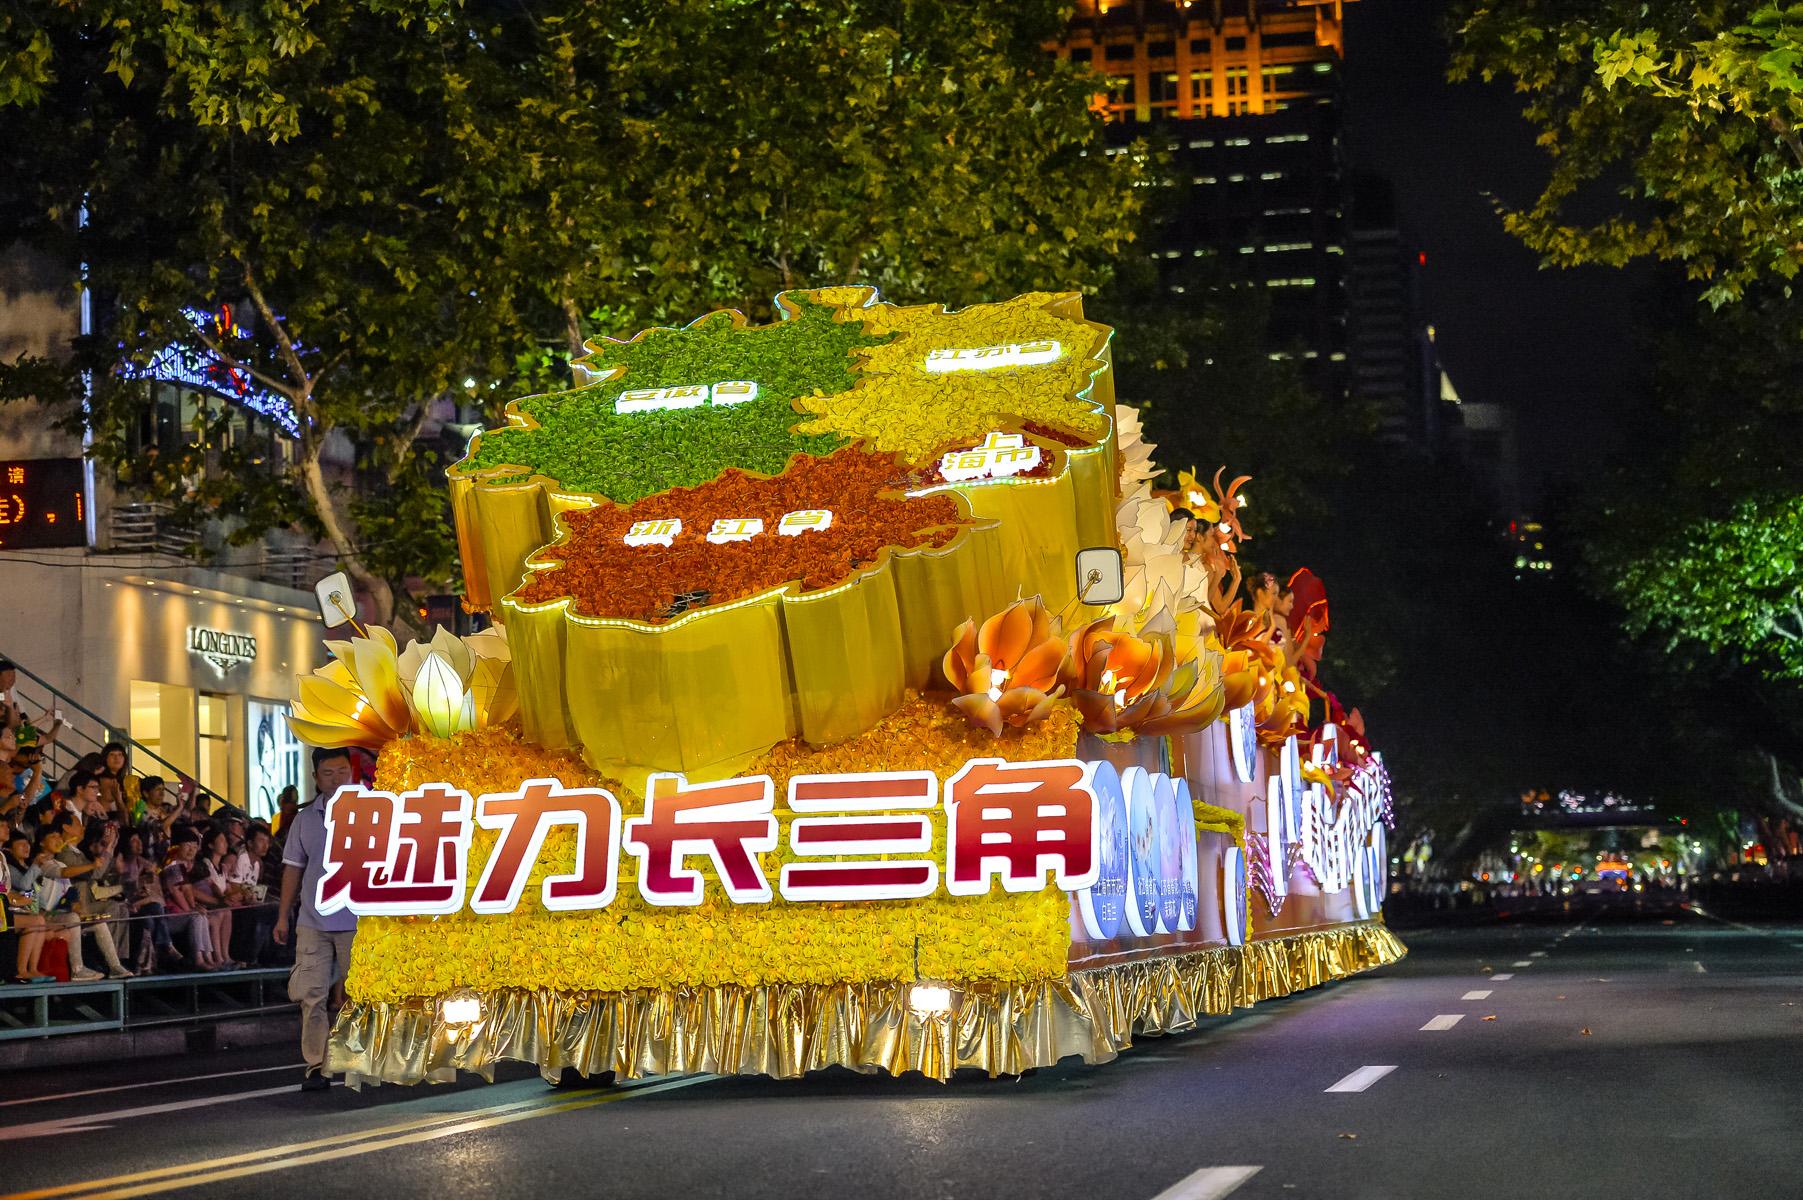 Floats Parade and Evaluation Awards